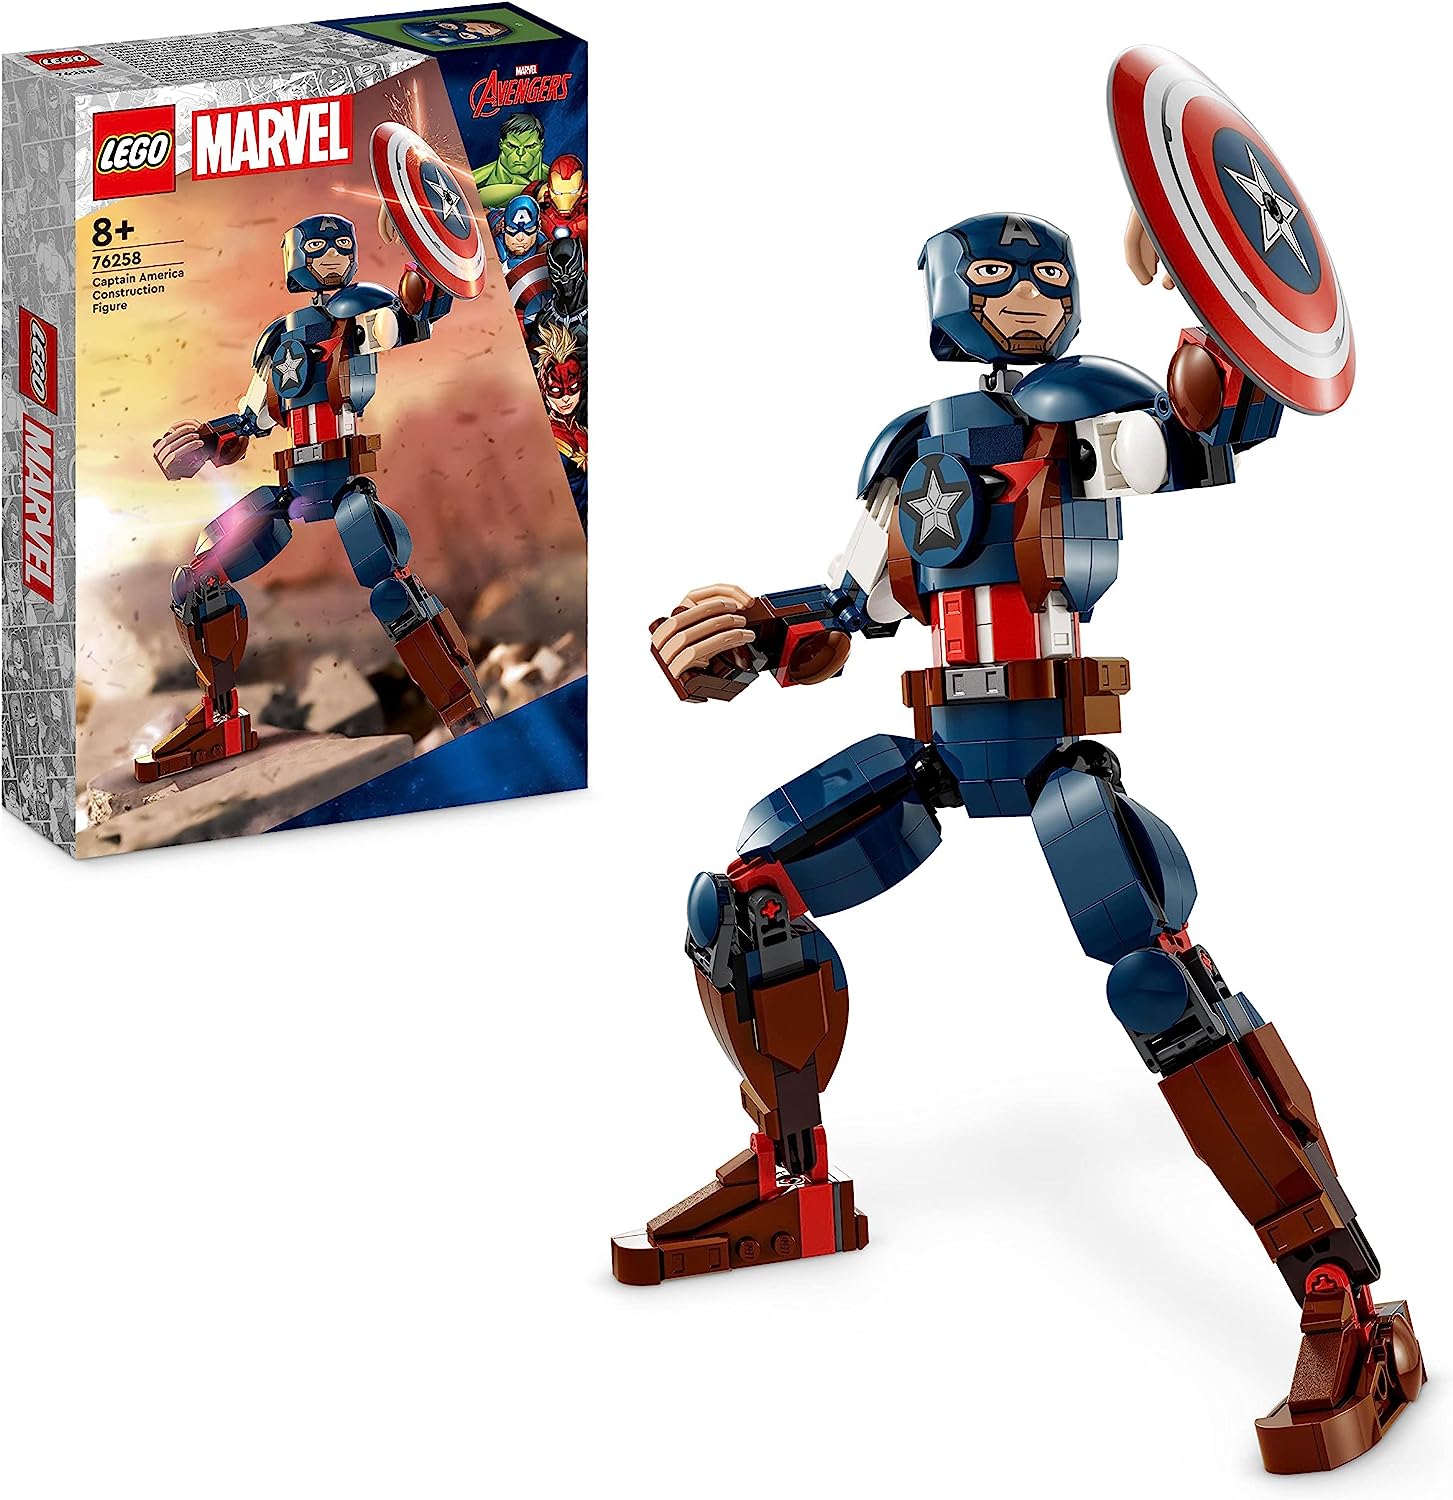 LEGO 76258 Marvel Captain America Building Figure, Superhero with Shield, Avengers Building Toy and Collectable Figure As Bedroom Accessory for Children, Boys and Girls from 8 Years